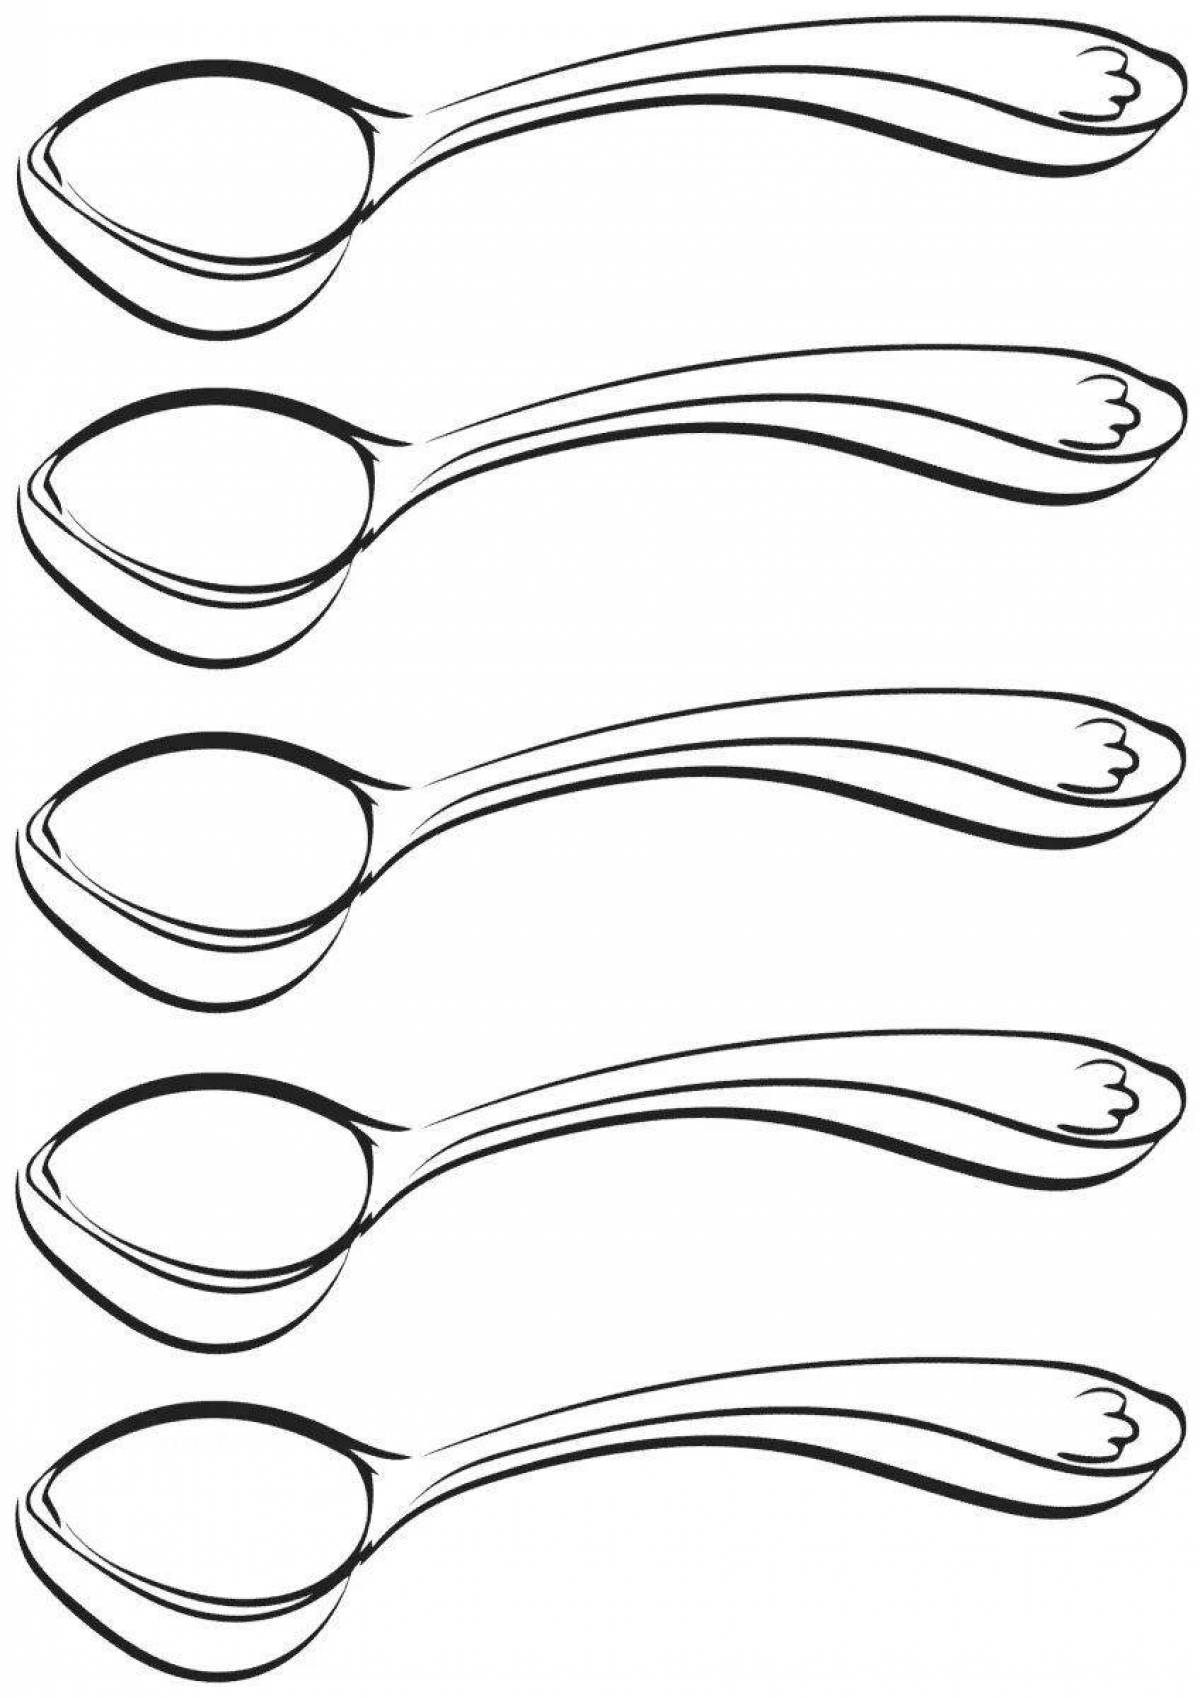 Coloring book for children with a sparkling spoon